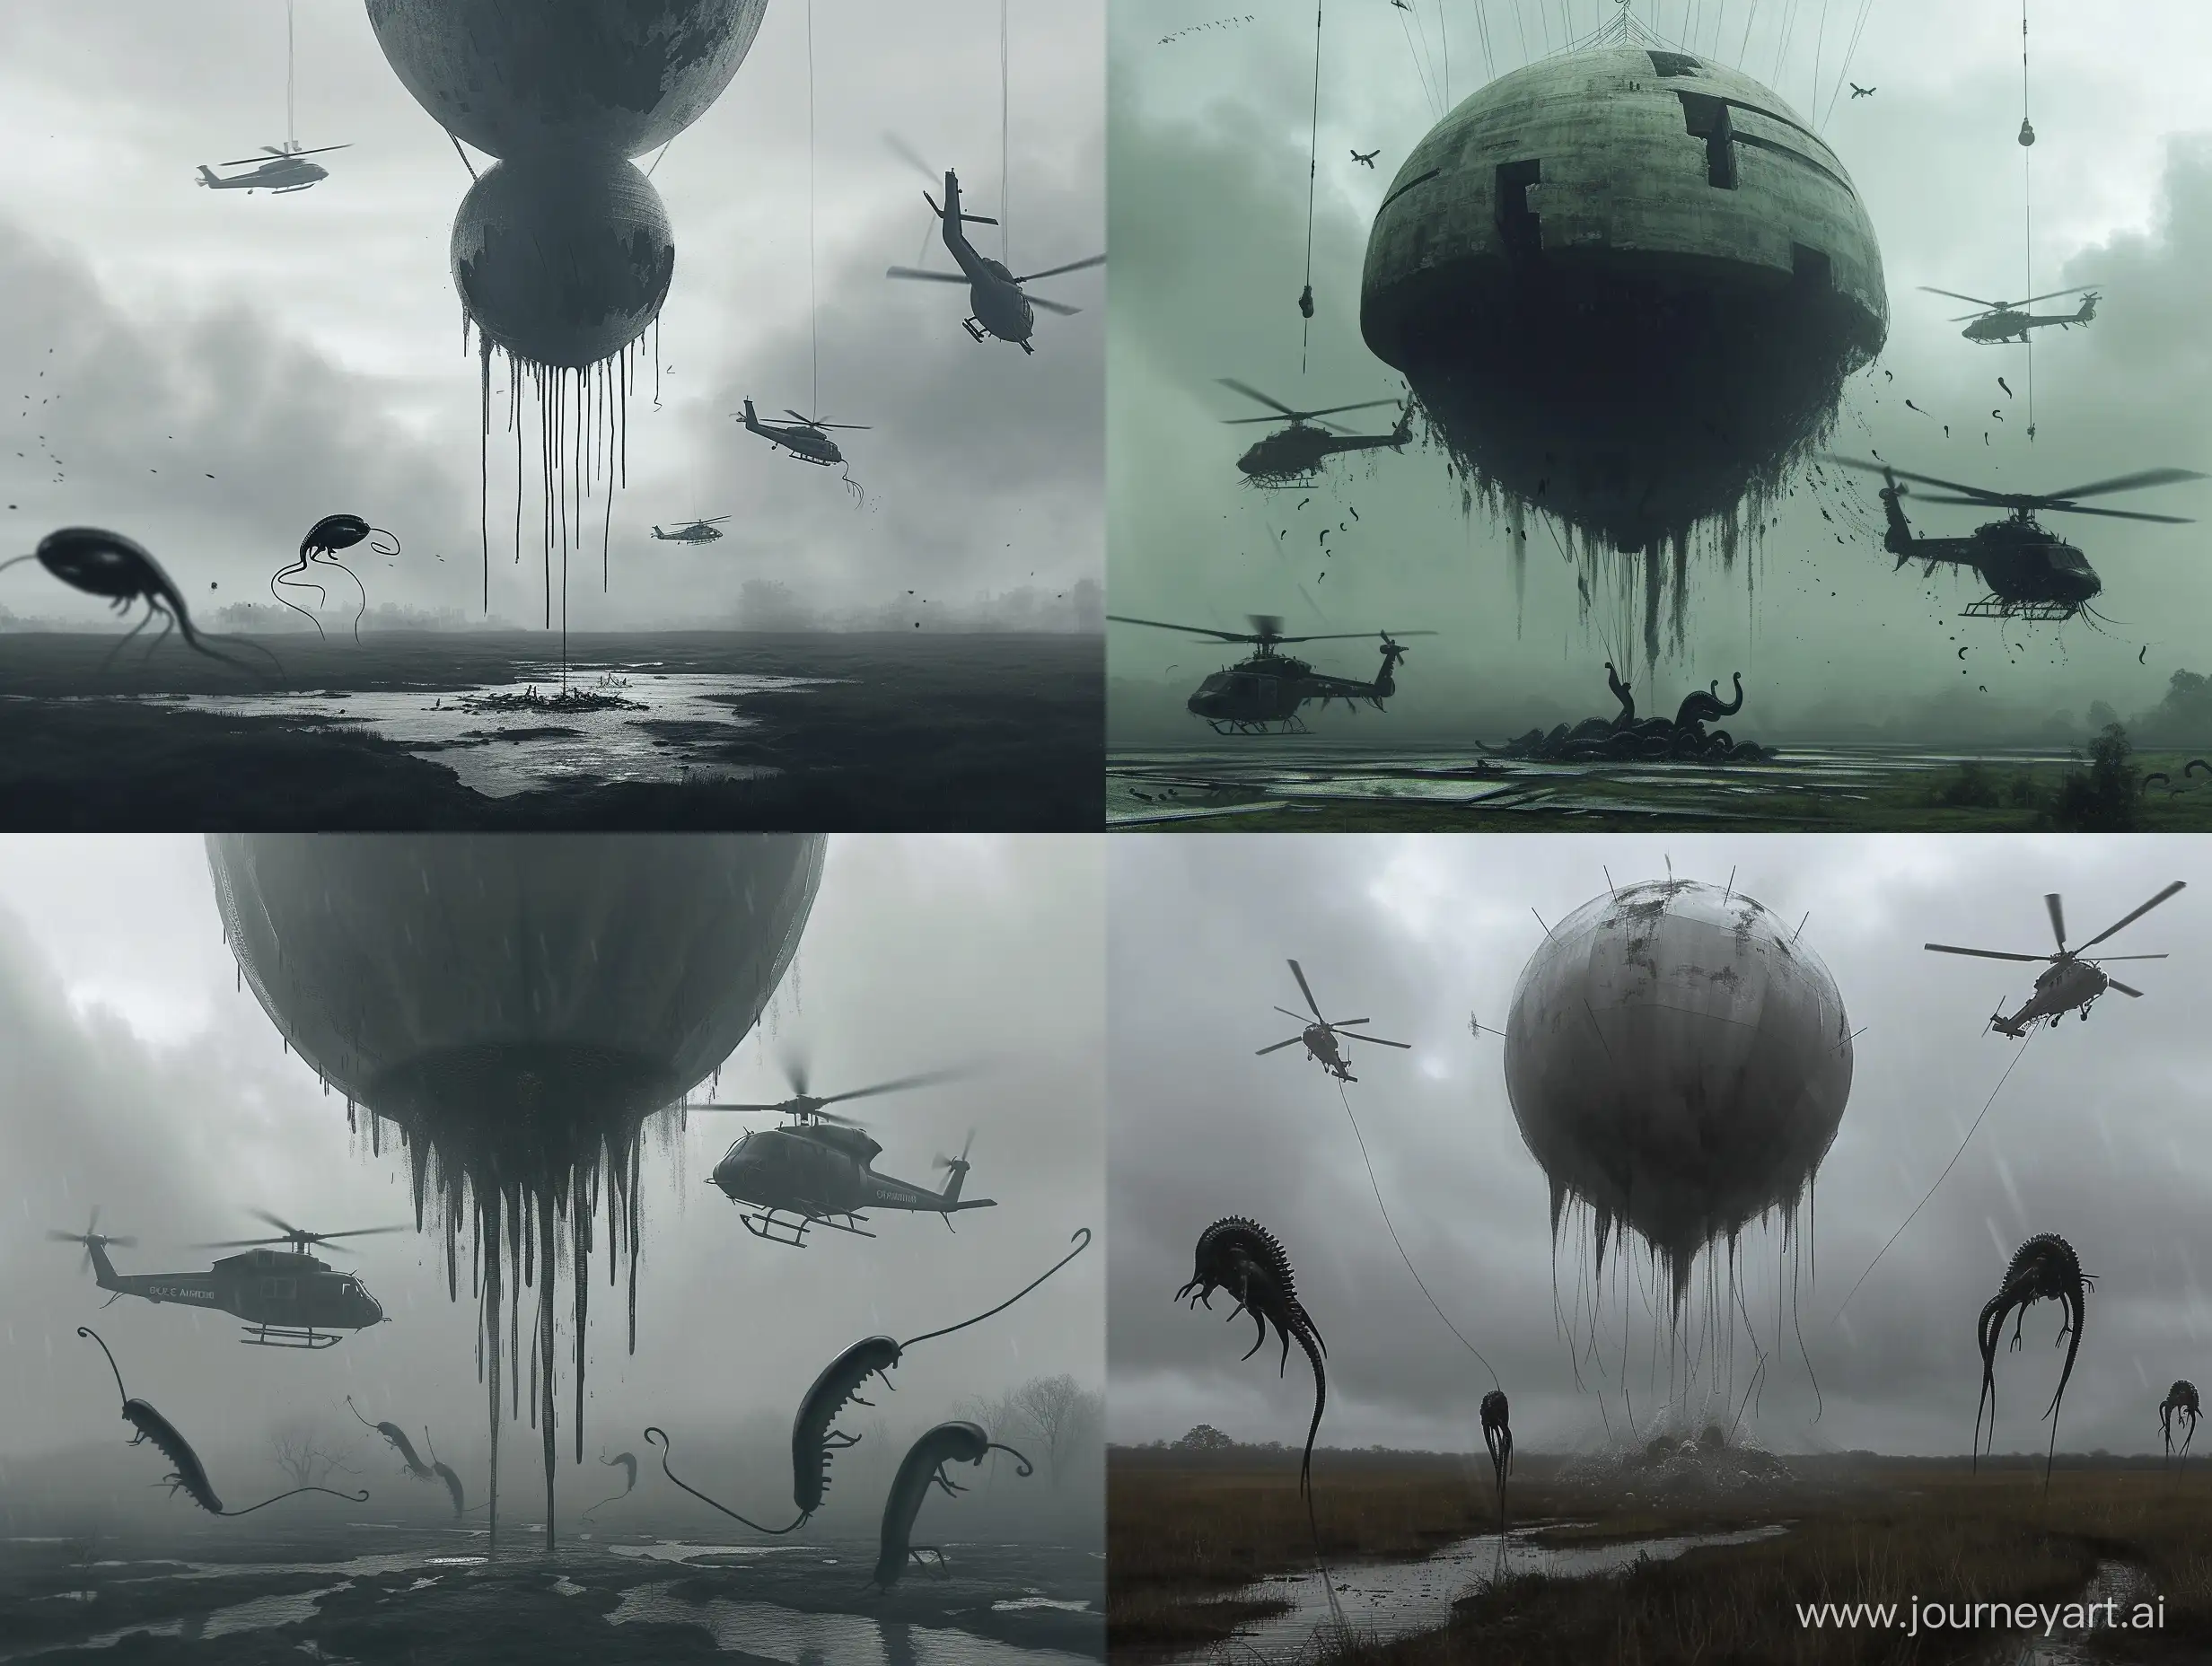 Concept art for the game, scp concept, overcast weather, bioarchitecture, levitating balloon, black slugs descend to the ground, military helicopters fly around it